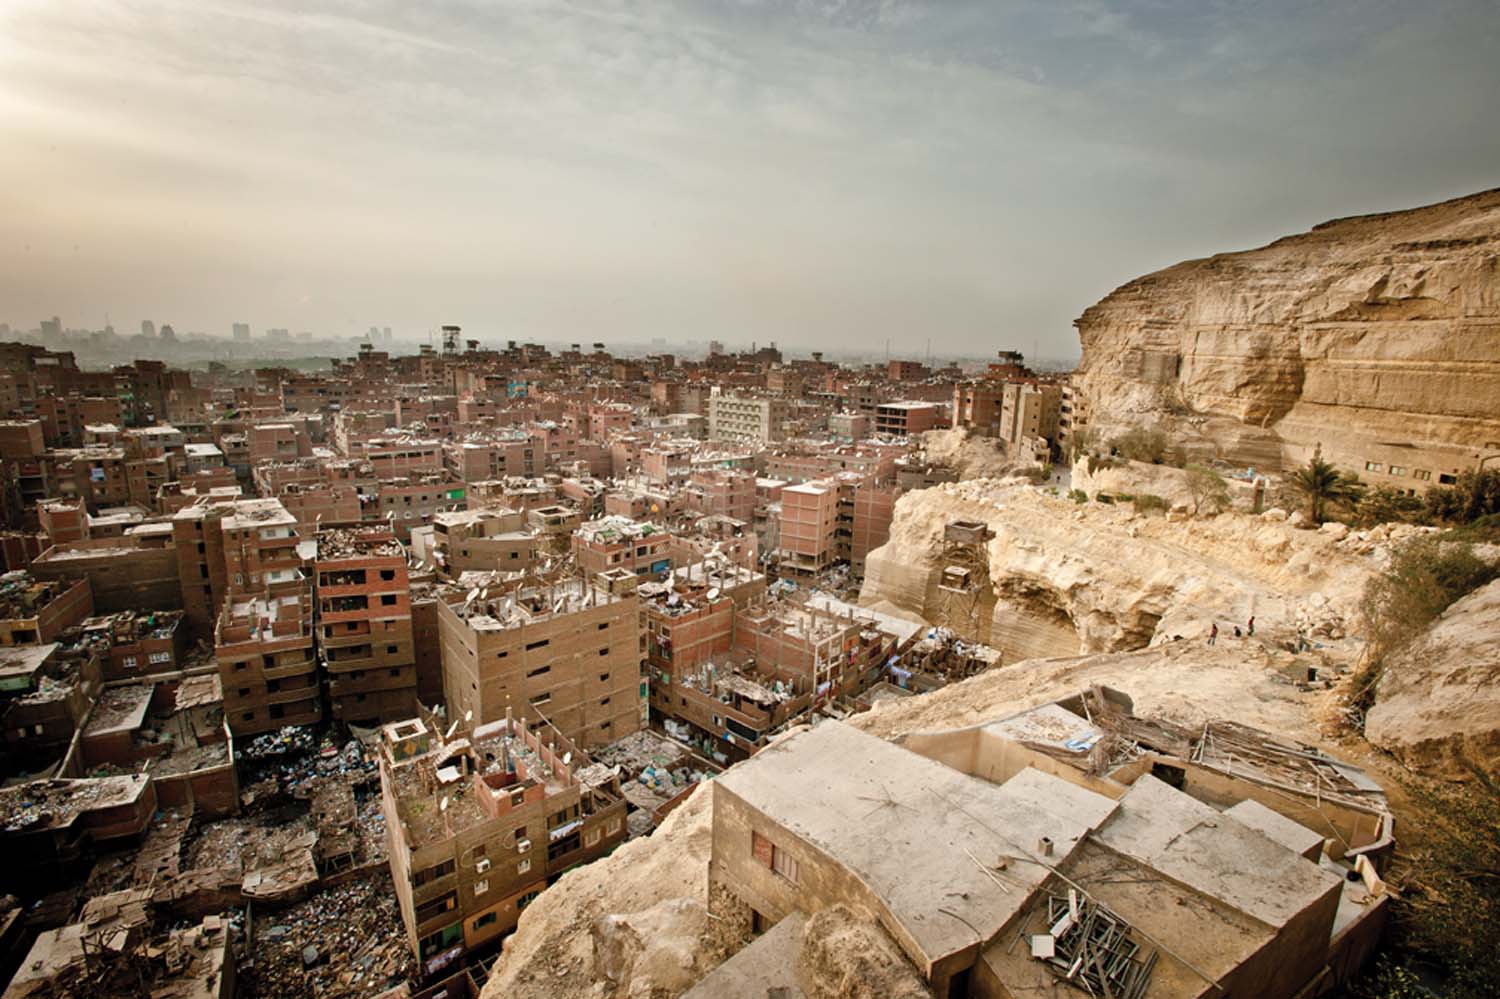 The view of Manshiet Nasser's garbage village and the Cairo skyline from the Moqattam Cliffs, the site of the Coptic Christian Cathedral of Saint Simon the Tanner.